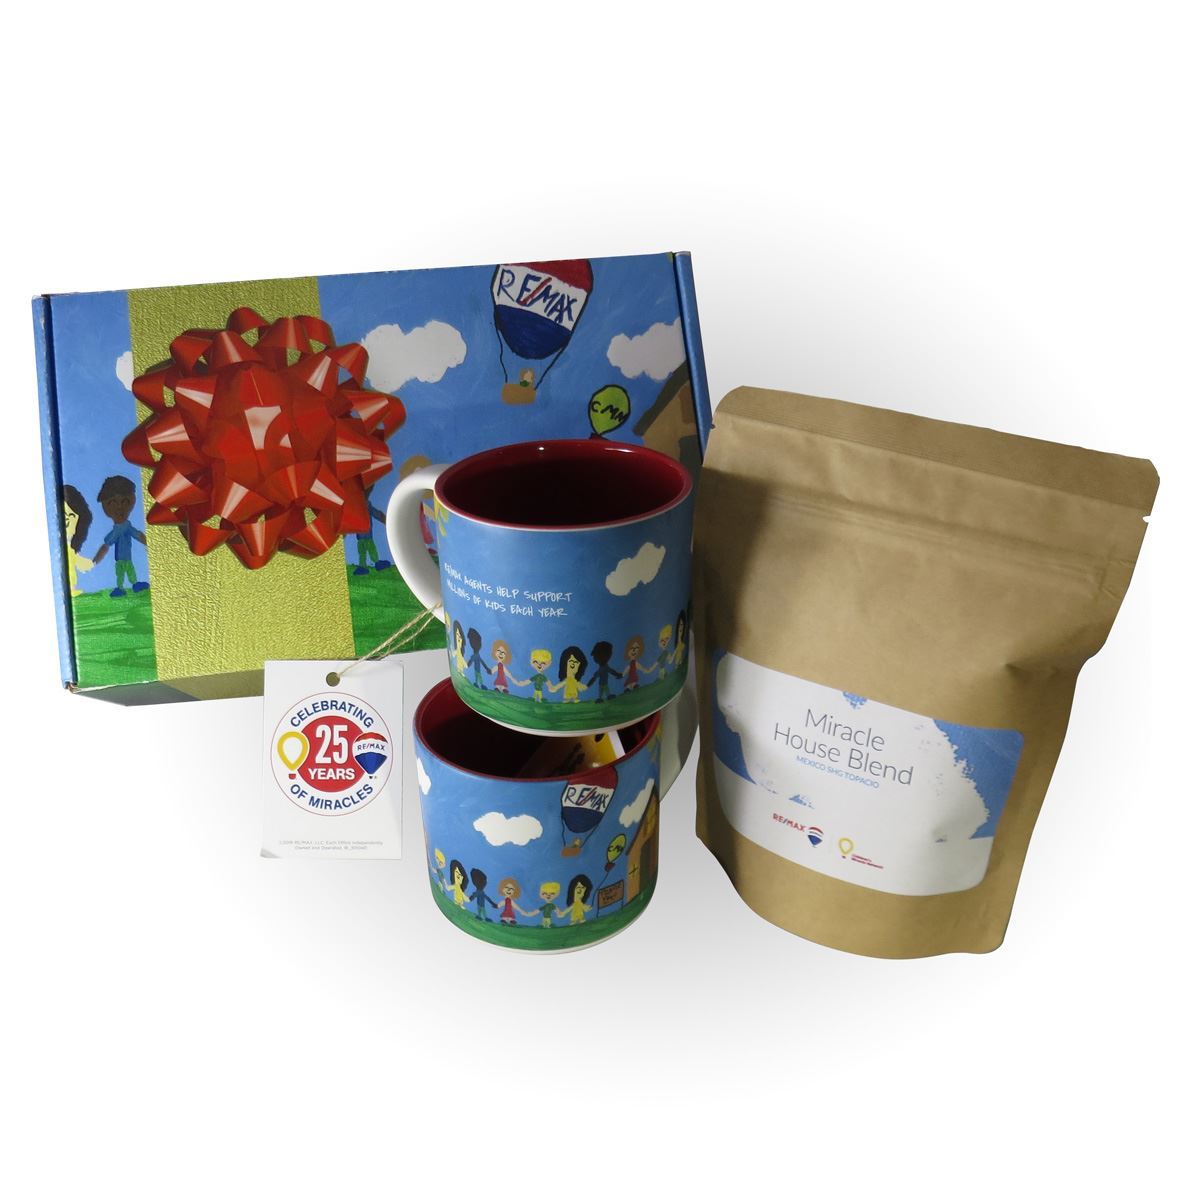 Picture of RE/MAX Children’s Miracle Network Mug Box Set